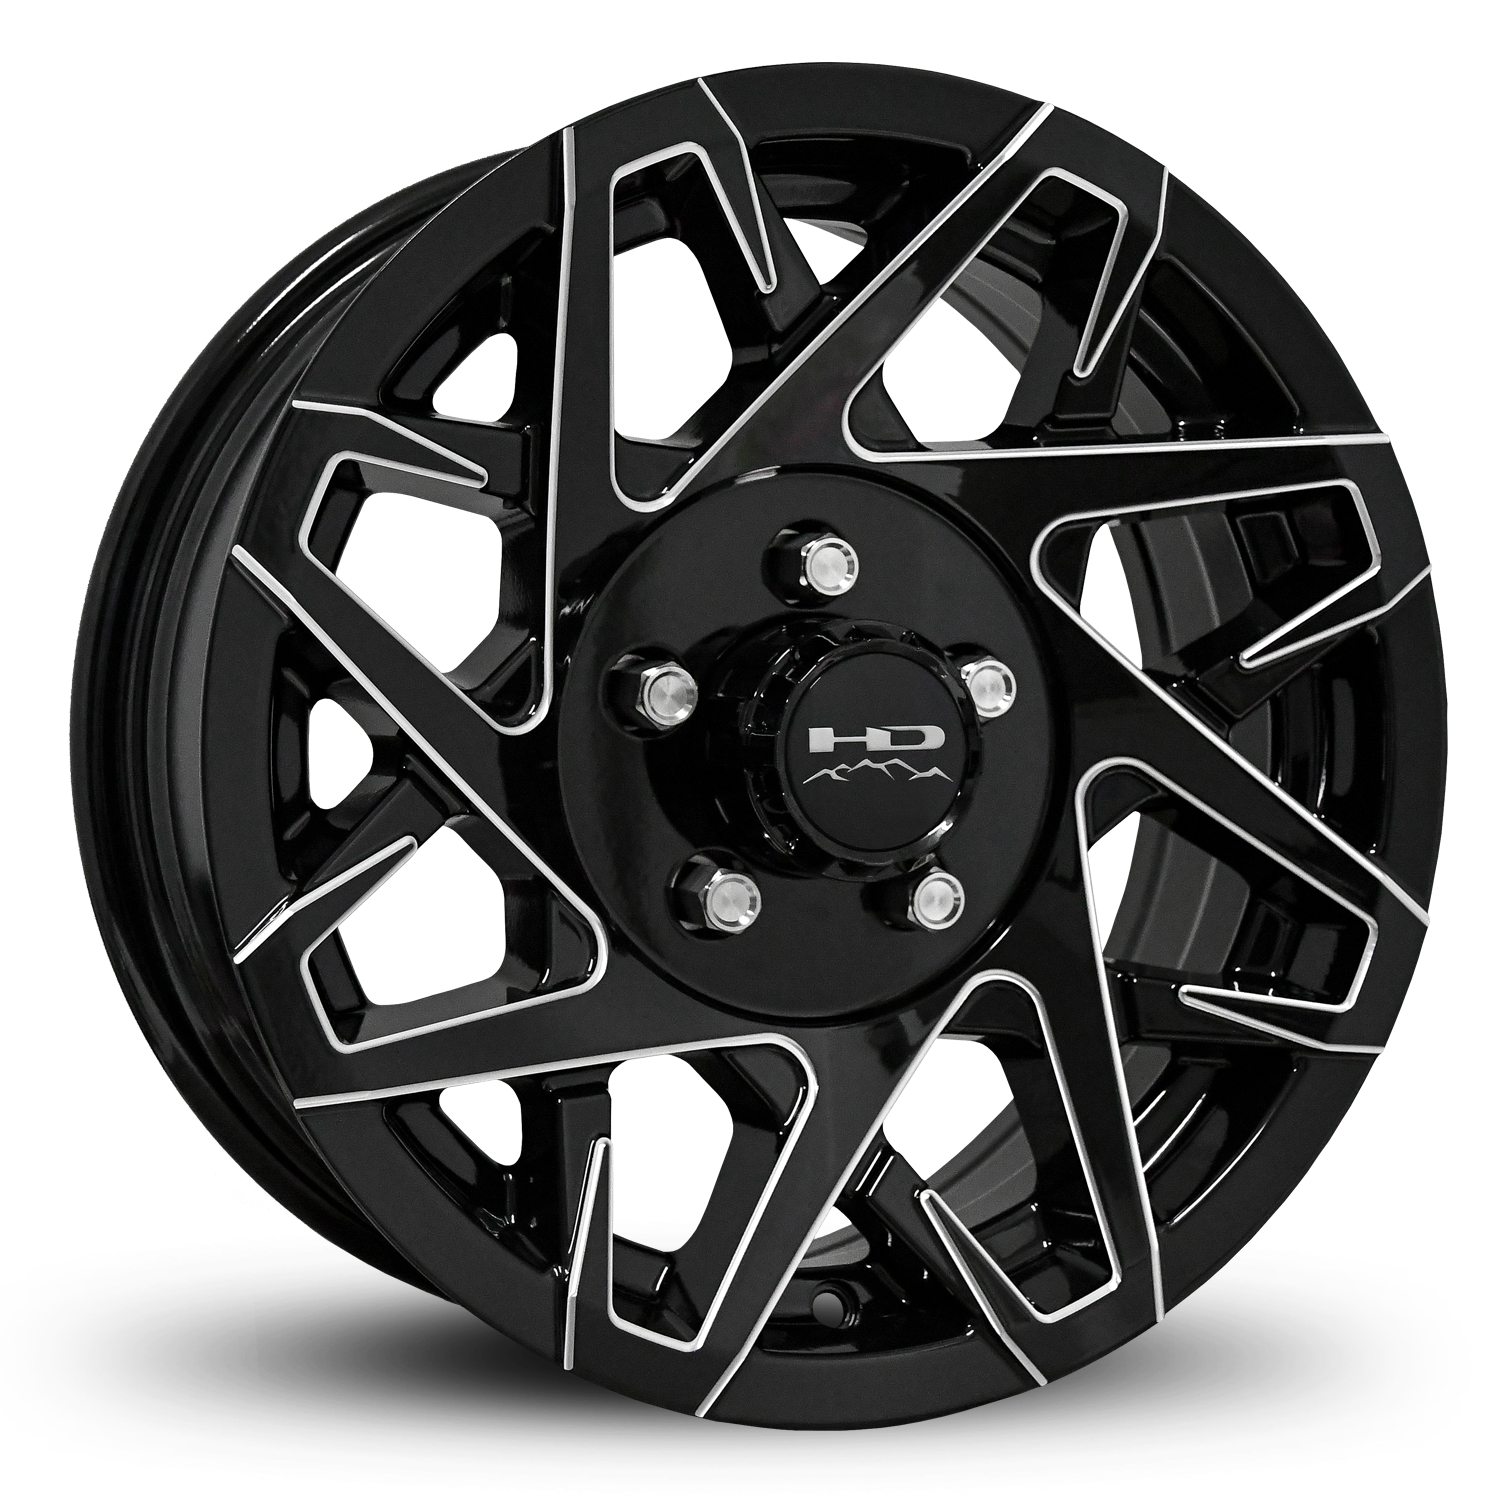 HD Off-Road Canyon Custom Trailer Wheel Rims in 15x6.0  15x6 Gloss Black CNC Milled Spoke Edges with Center Cap & Logo fits 5x4.50 / 5x114.3 Axle Boat, Car, RV, Travel, Concession, Horse, Utility, Lawn & Garden, & Landscaping.